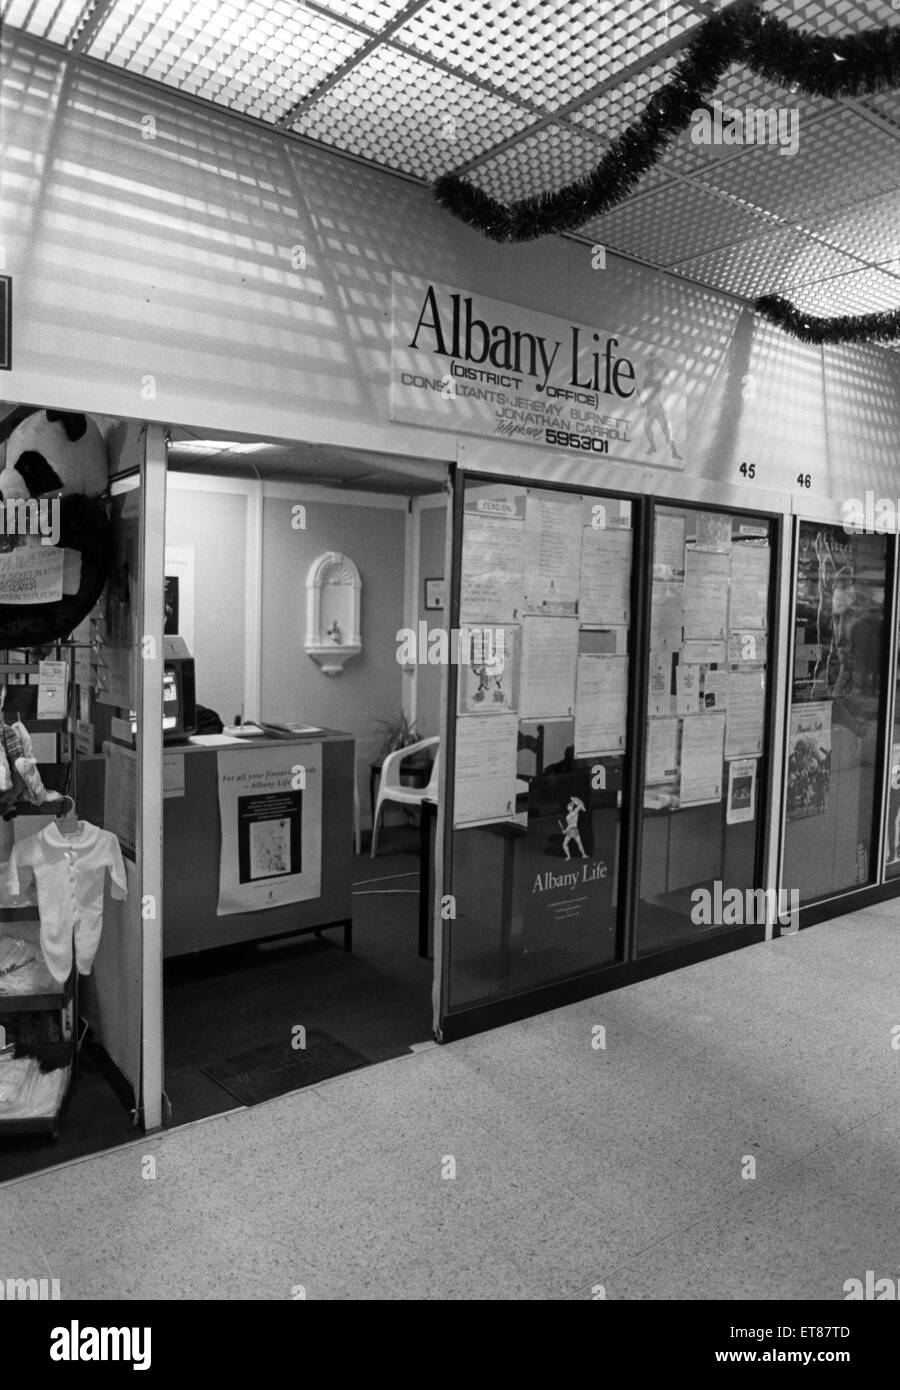 Albany Life at The Parkway Centre in Coulby Newham, Middlesbrough.  11th November 1991. Stock Photo